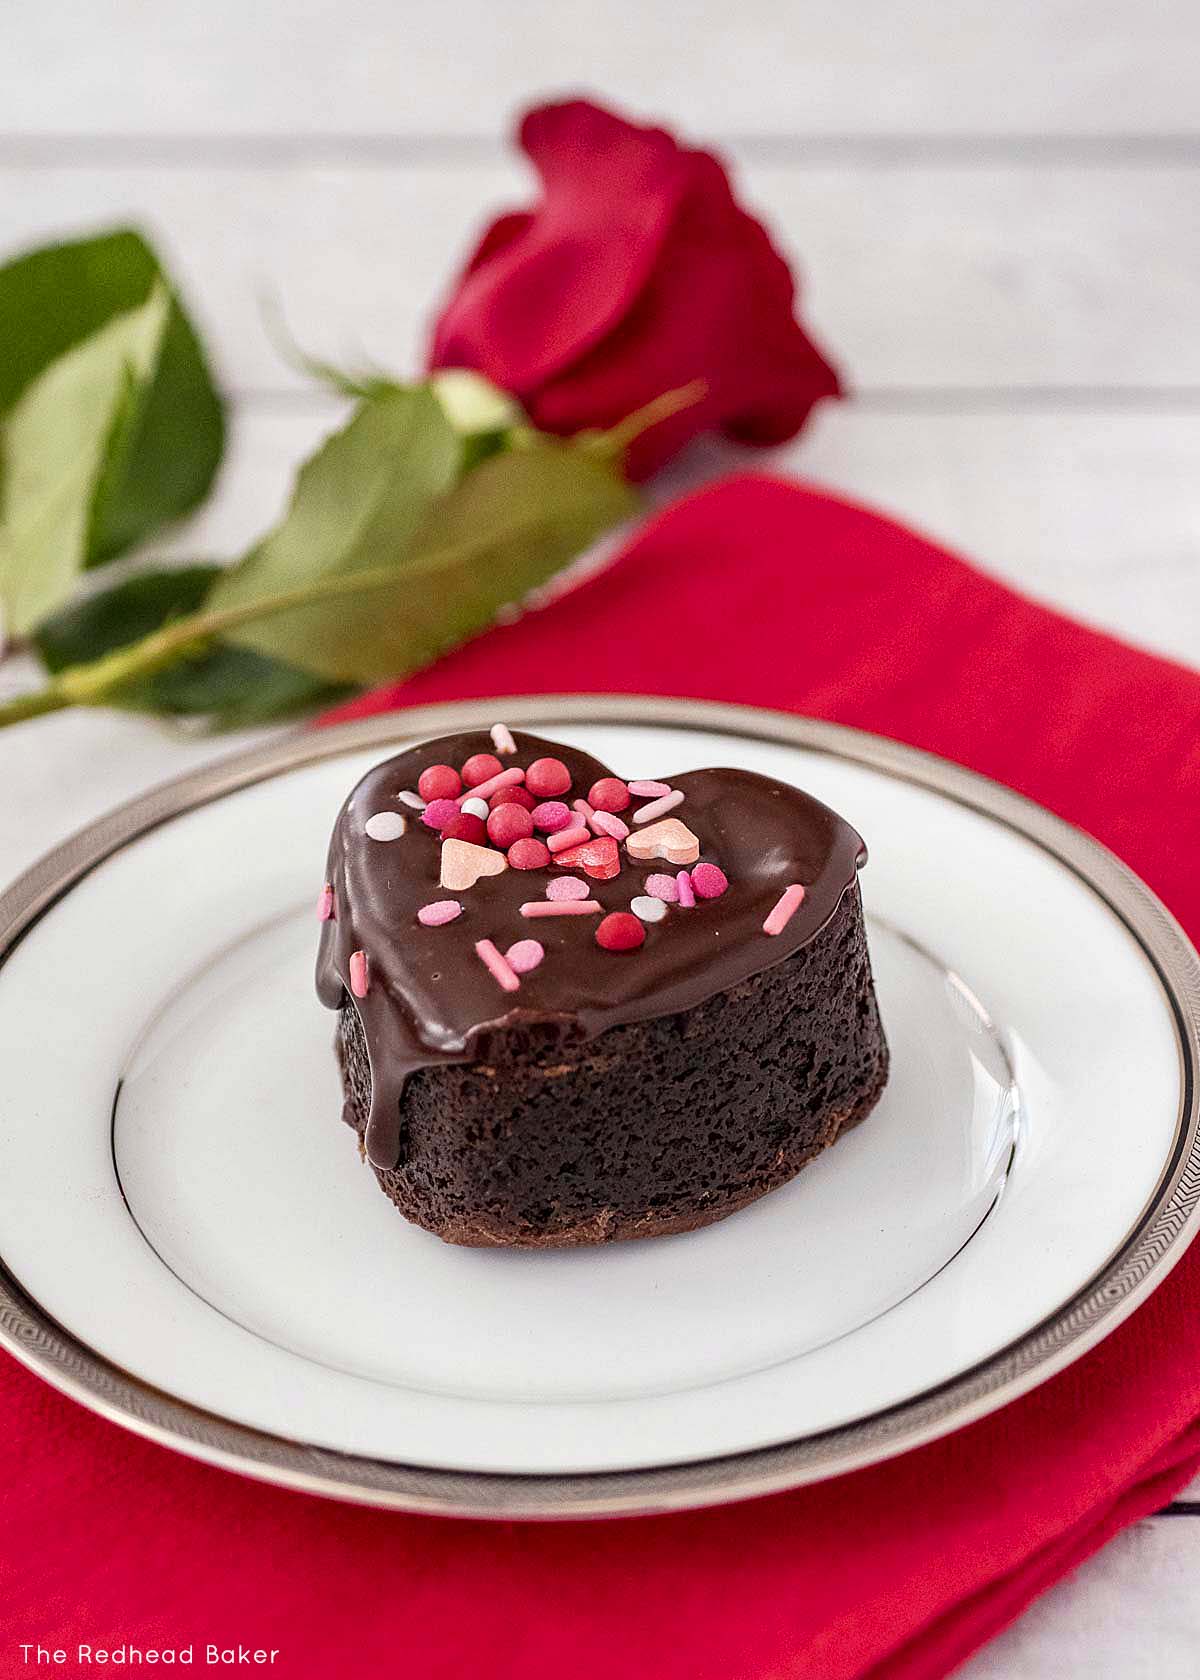 A chocolate-covered brownie heart on a white plate with a red rose.